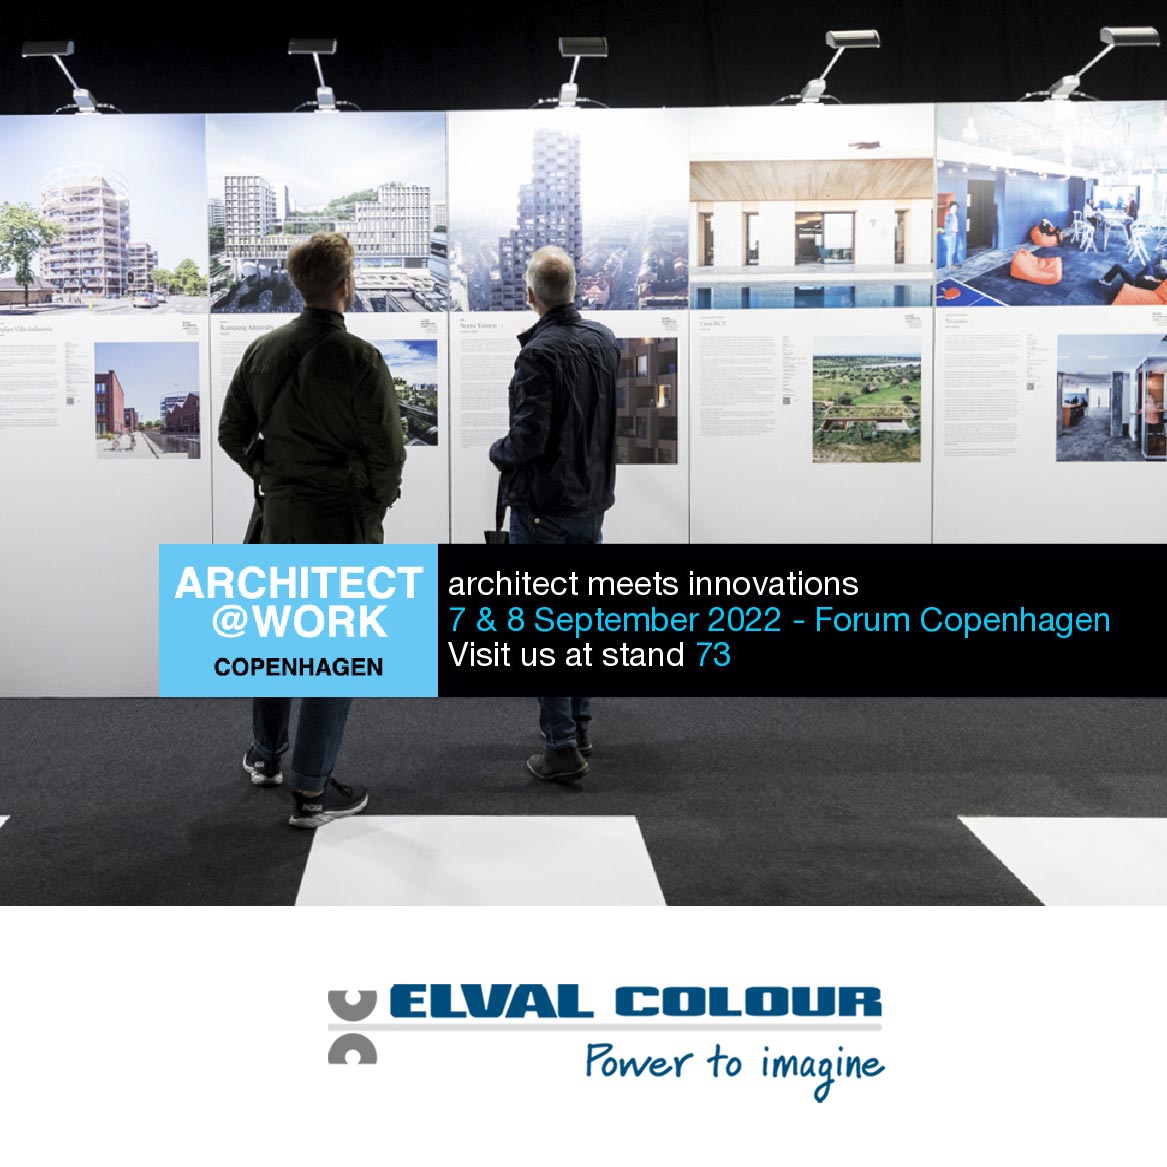 Elval Colour is participating at Architect@Work in Copenhagen